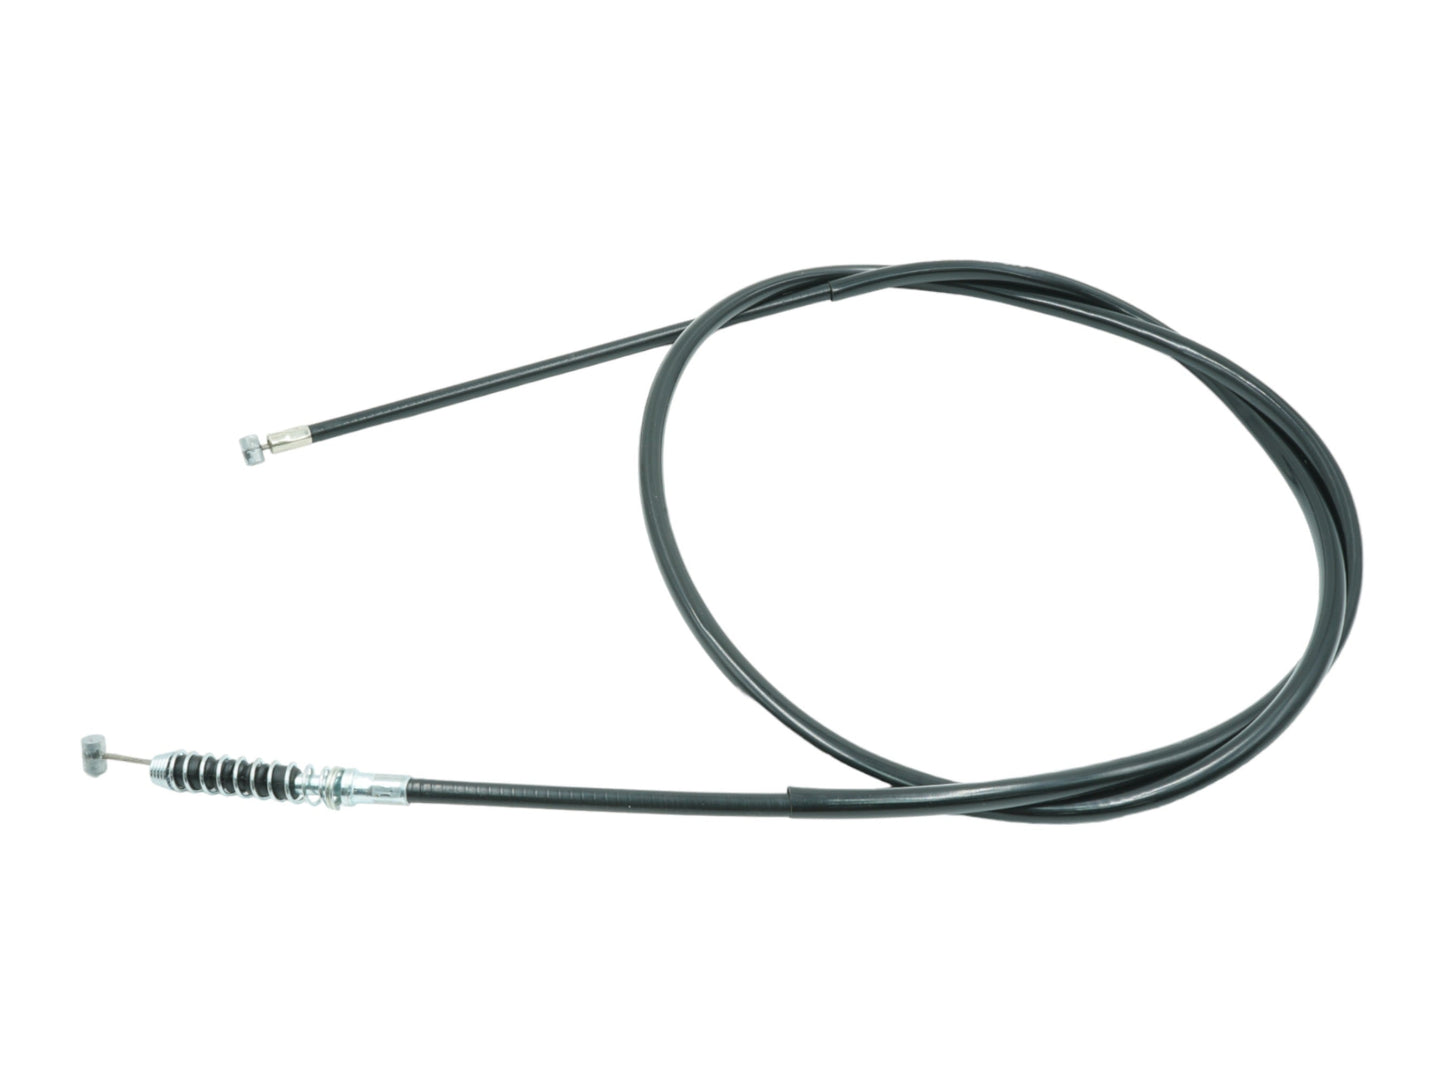 New Replacement Rear Hand Brake Cable Fits Honda 2009 TRX300x